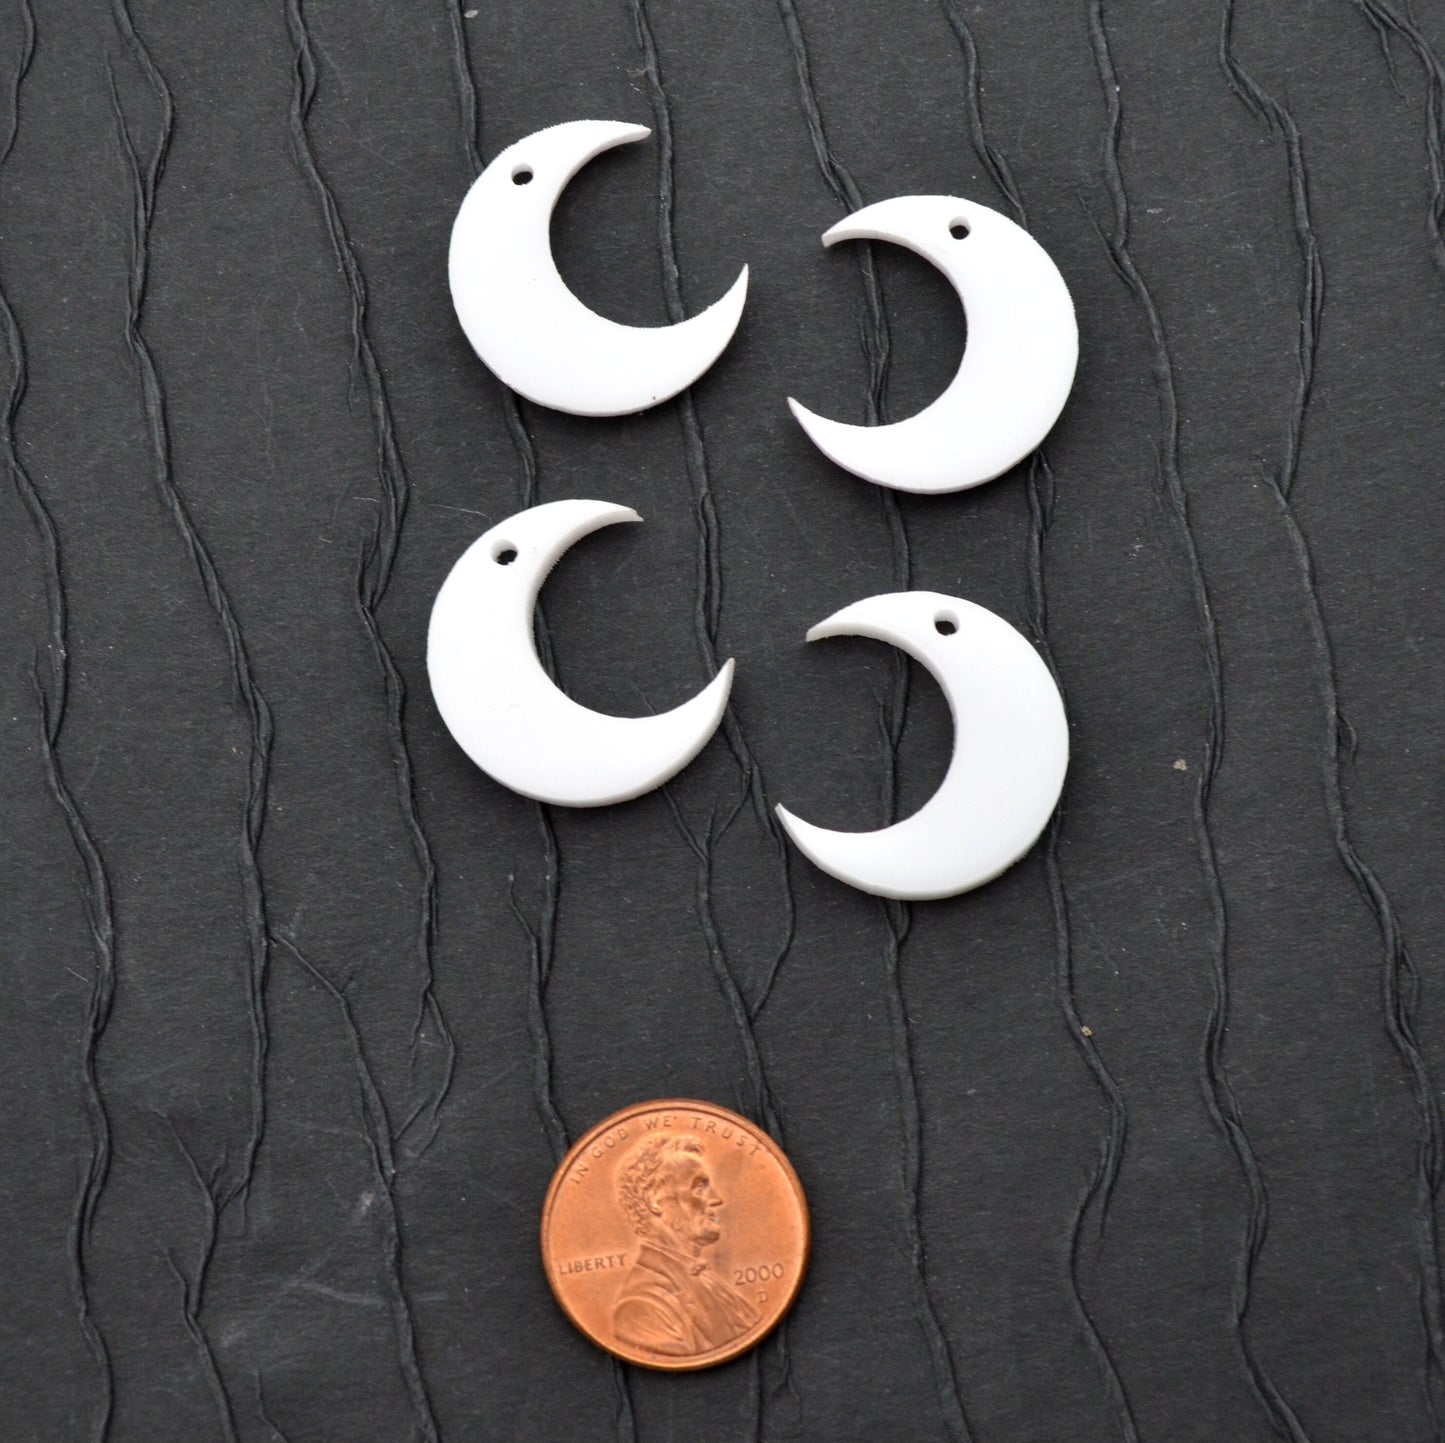 Bright White Moon Charms - 4 Pieces In Laser Cut Acrylic